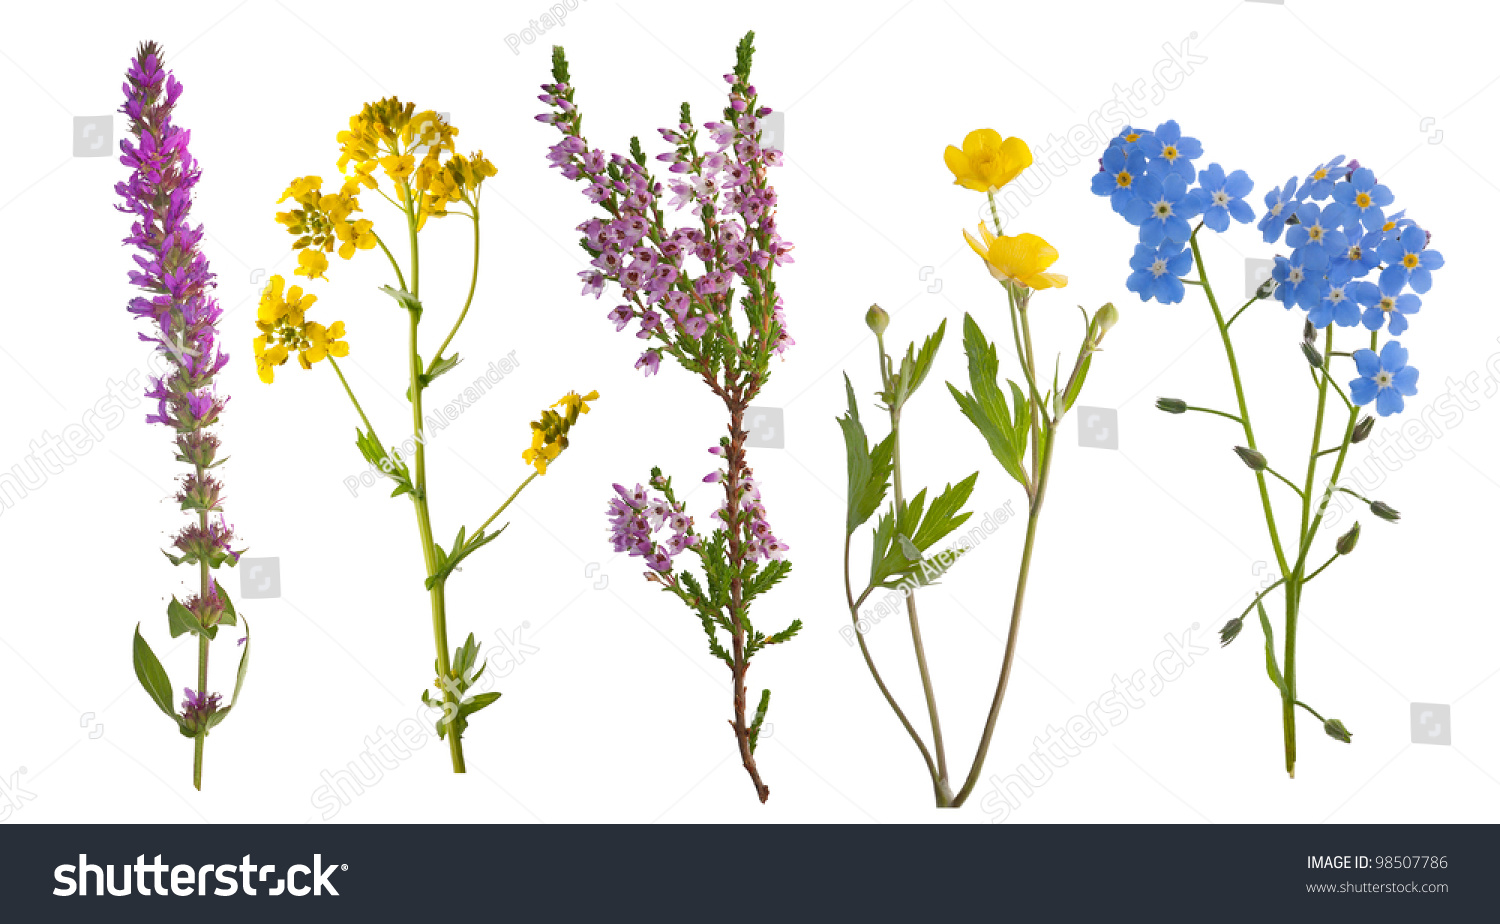 wild flowers collection isolated on white background #98507786